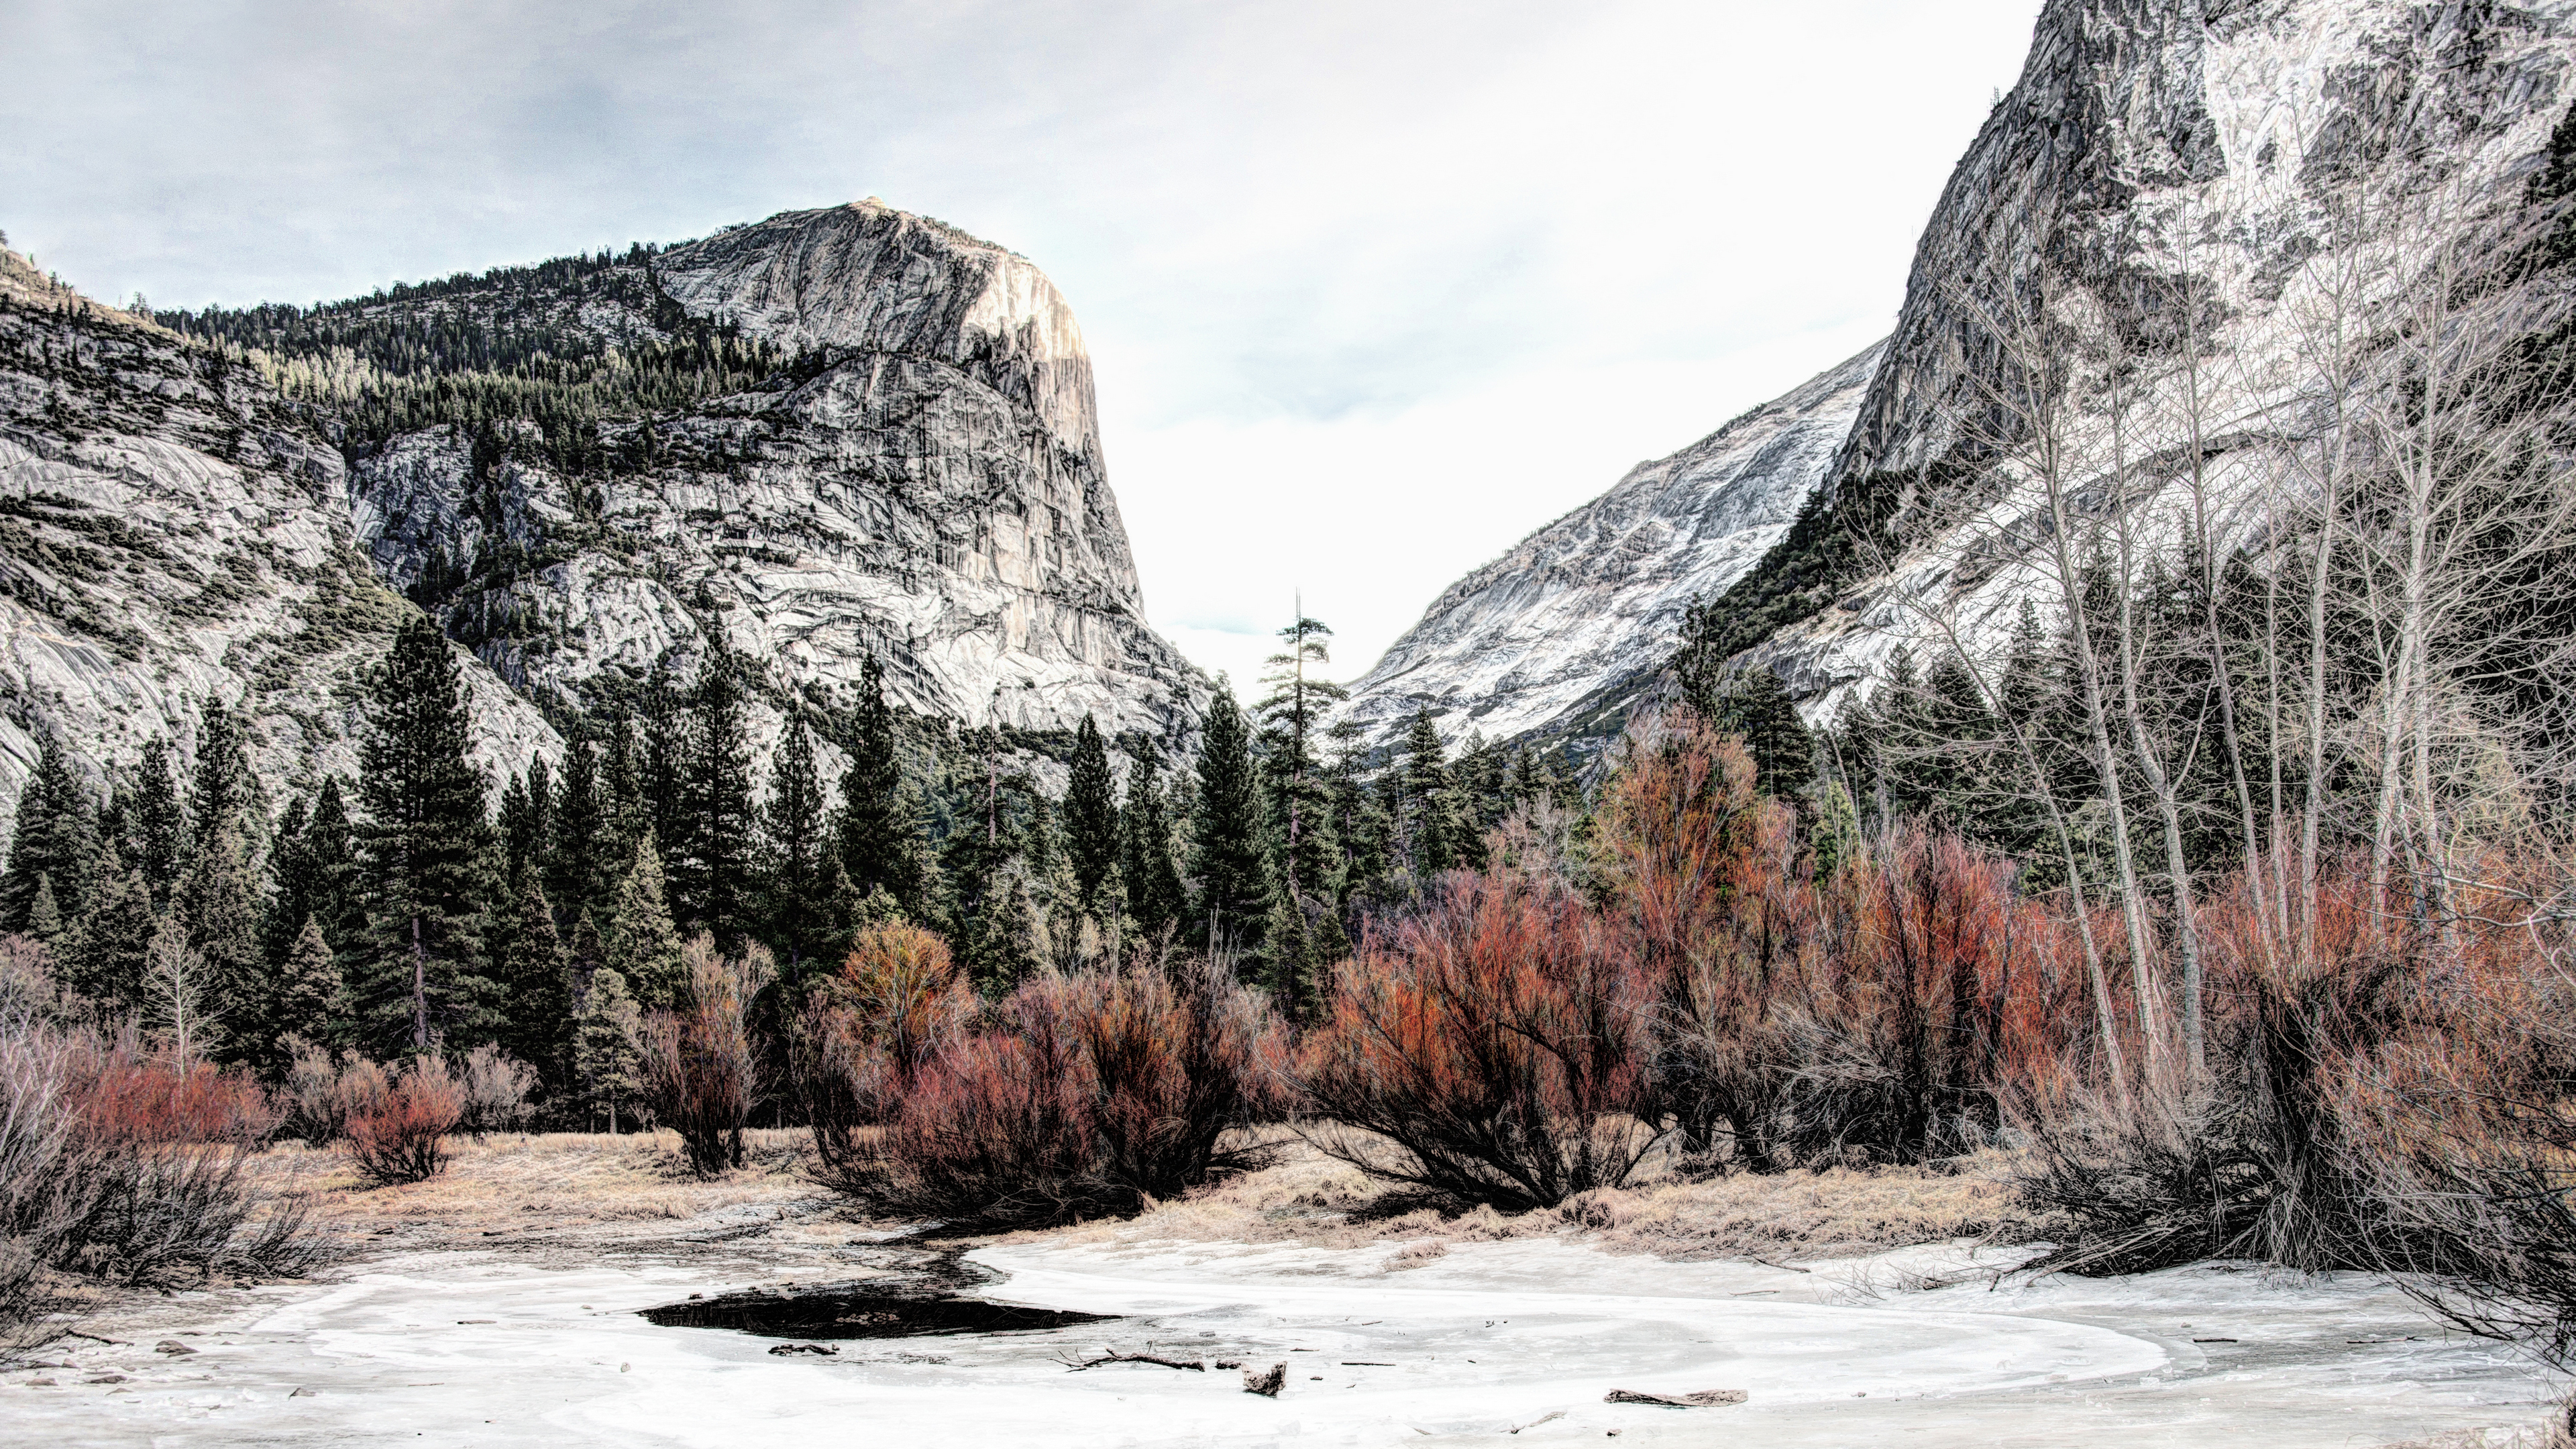 General 3840x2160 Trey Ratcliff 4K photography California snow trees mountains nature winter Yosemite Valley